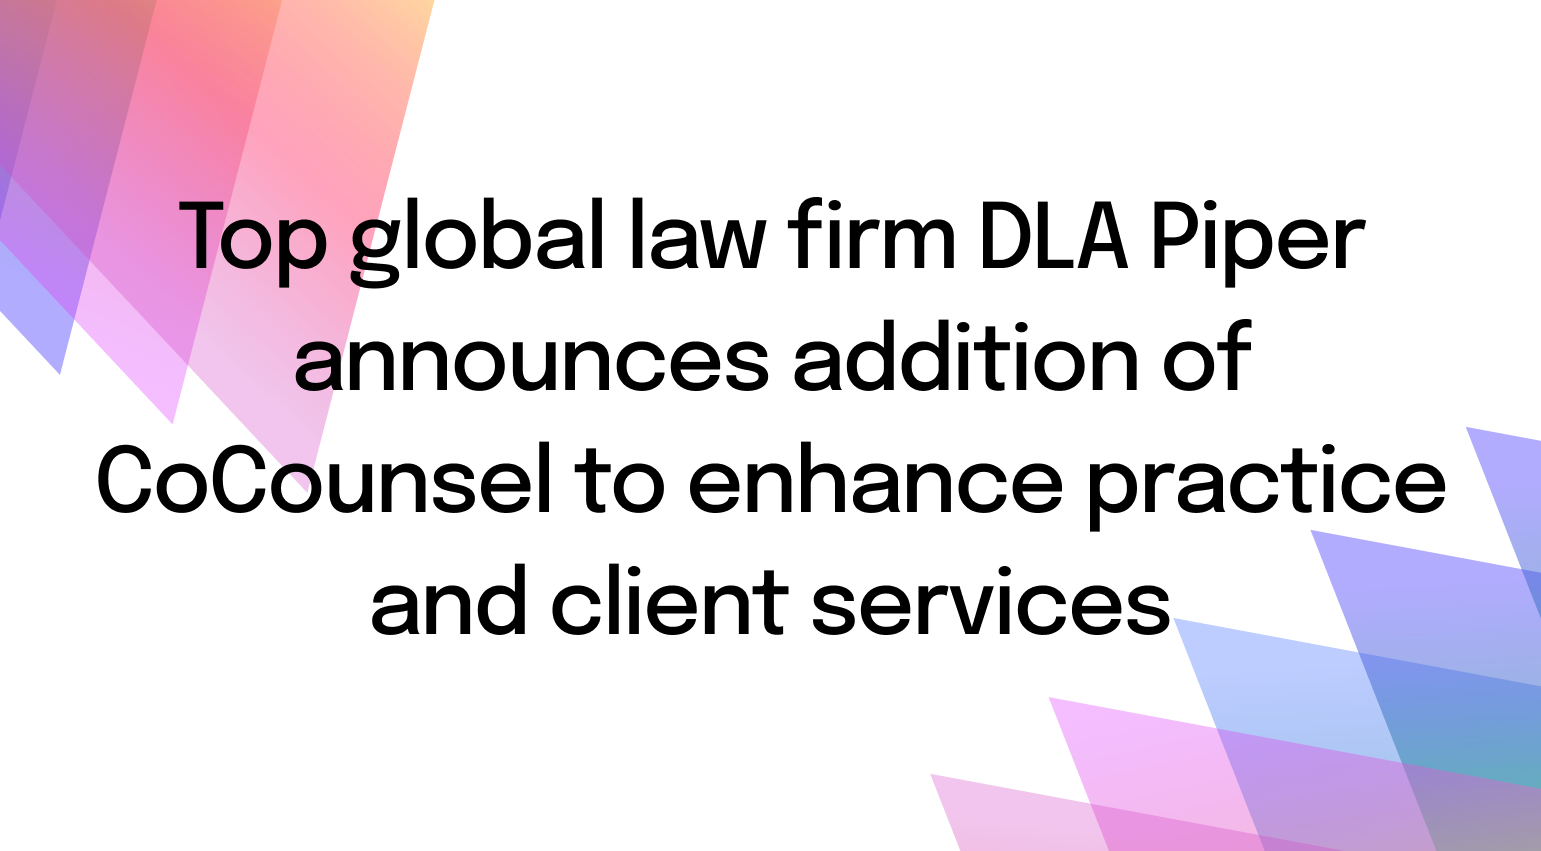 Global law firm DLA Piper announces addition of CoCounsel to enhance practice and client services